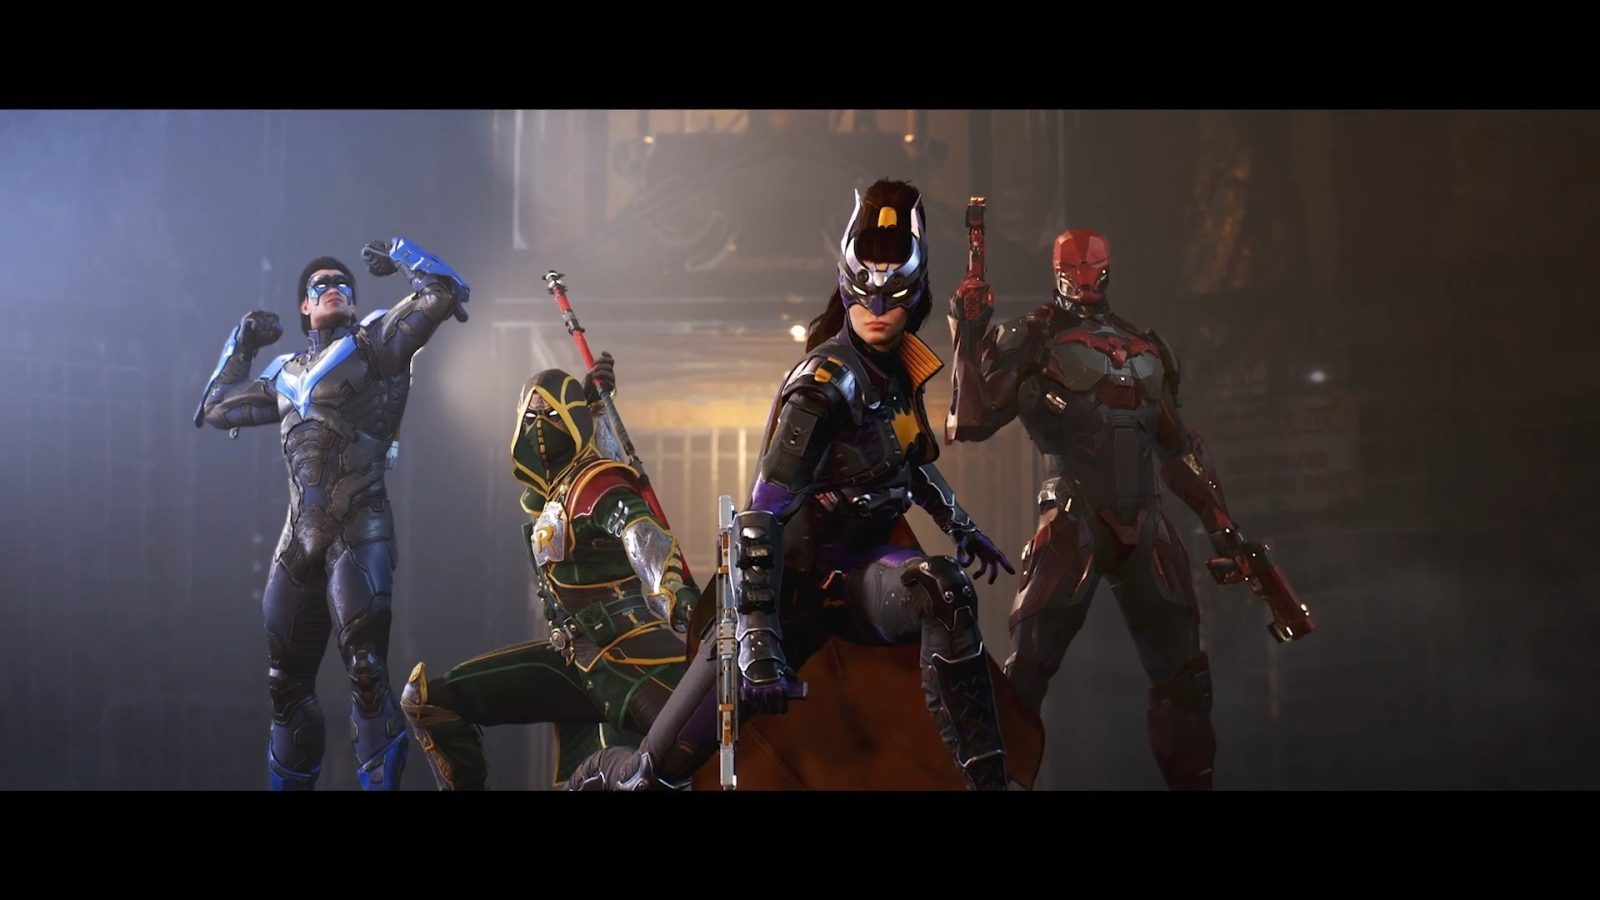 Gotham Knights adds 4-player Heroic Assault mode and 2-player Showdown mode  - GAMING TREND